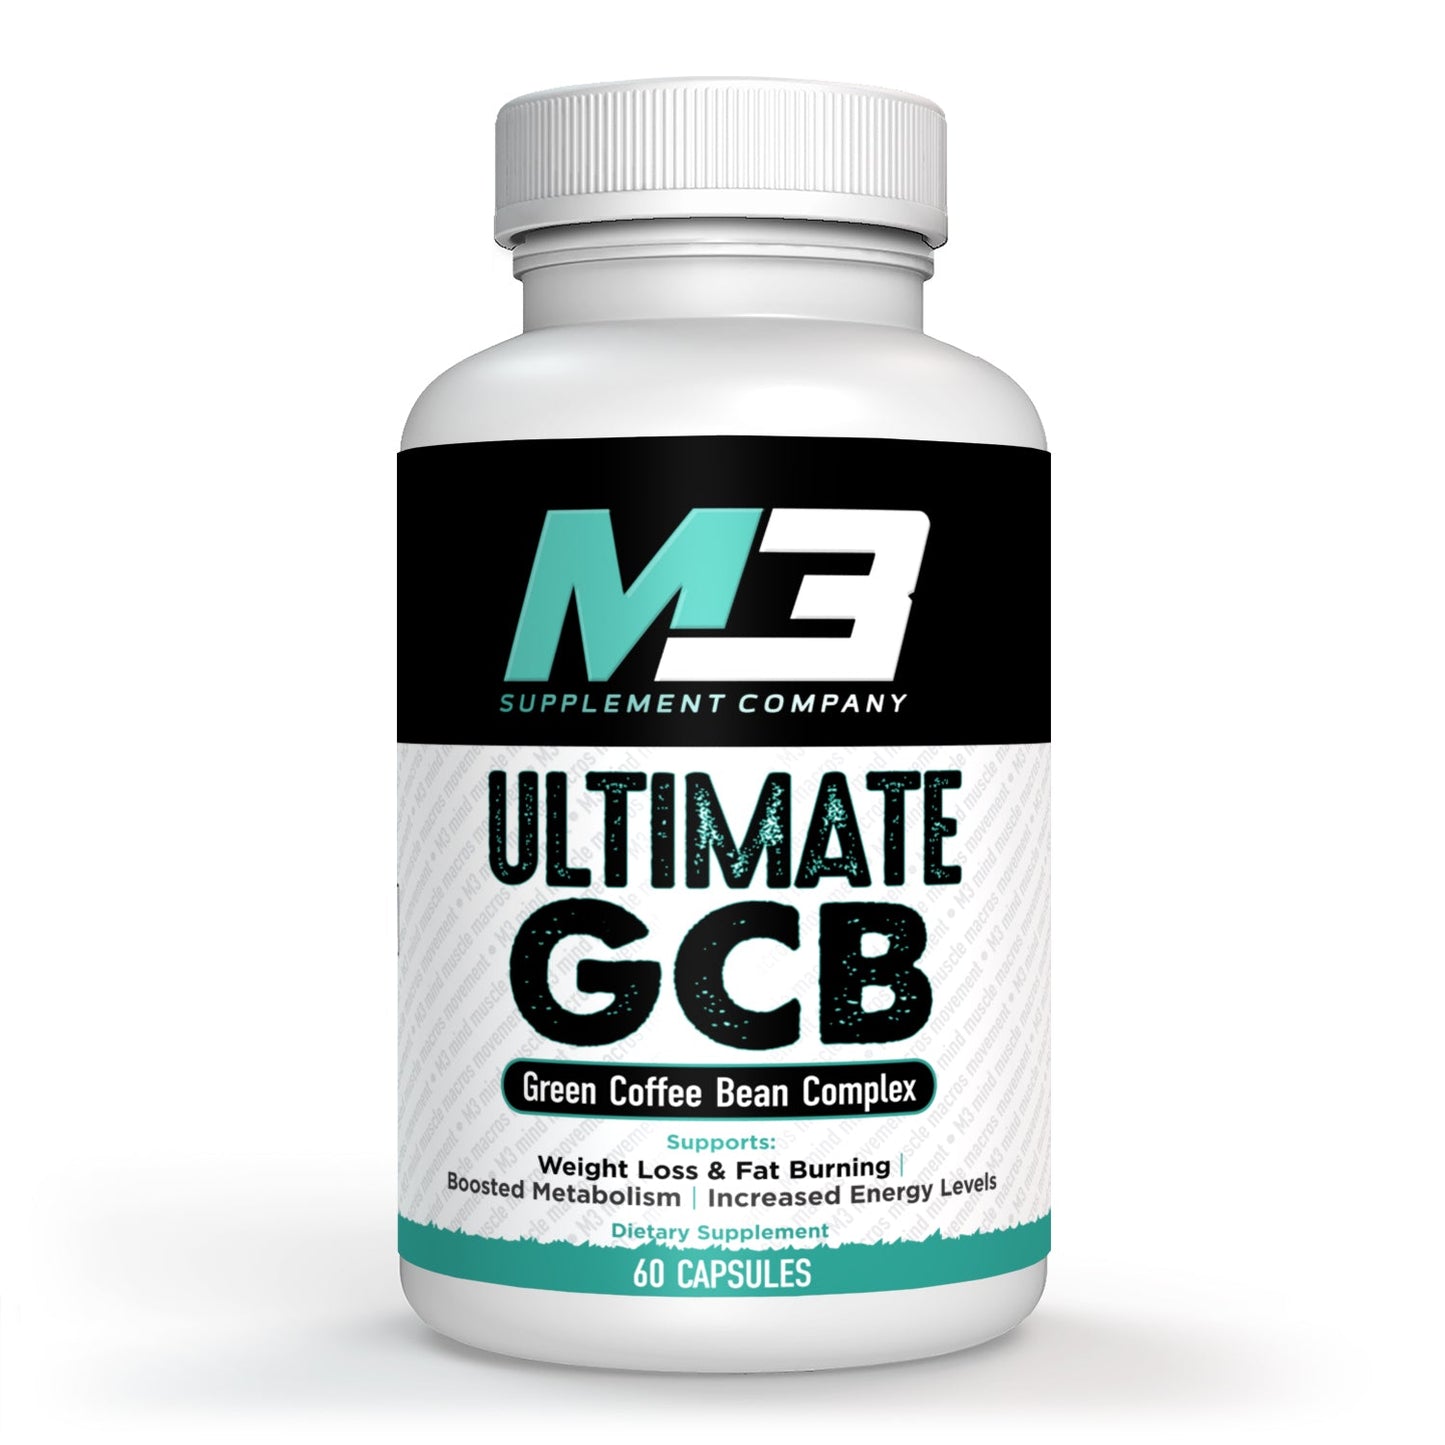 Whey Protein Isolate Chocolate + M3 Ultimate Cleanse + M3 Green Coffee Bean 60 Capsules-30 Day Supply